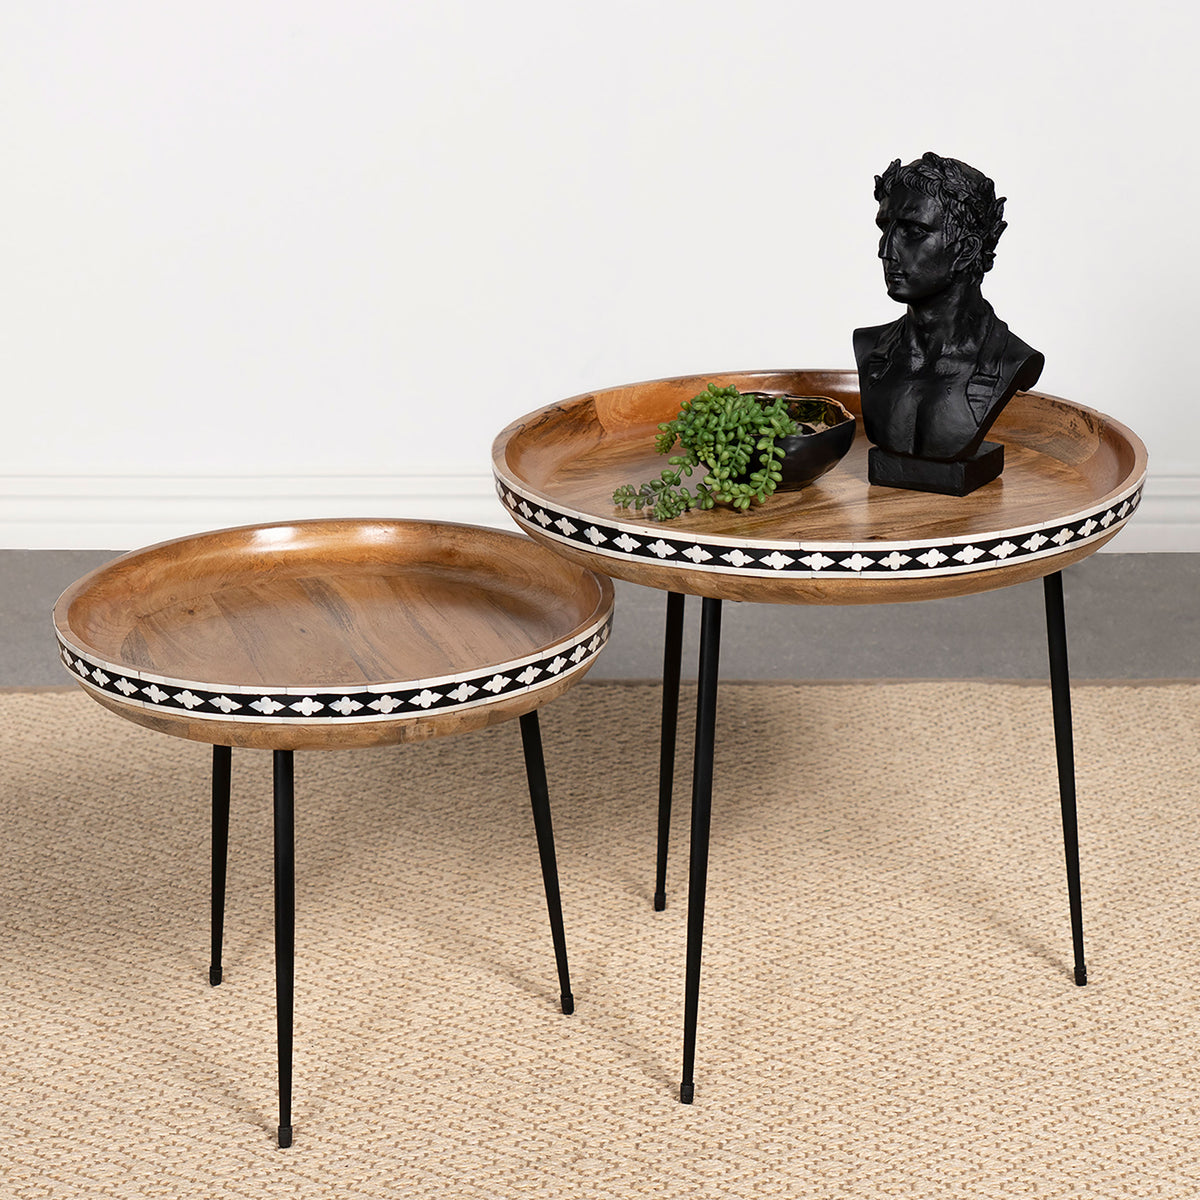 Ollie 2-piece Round Nesting Table Natural and Black Ollie 2-piece Round Nesting Table Natural and Black Half Price Furniture